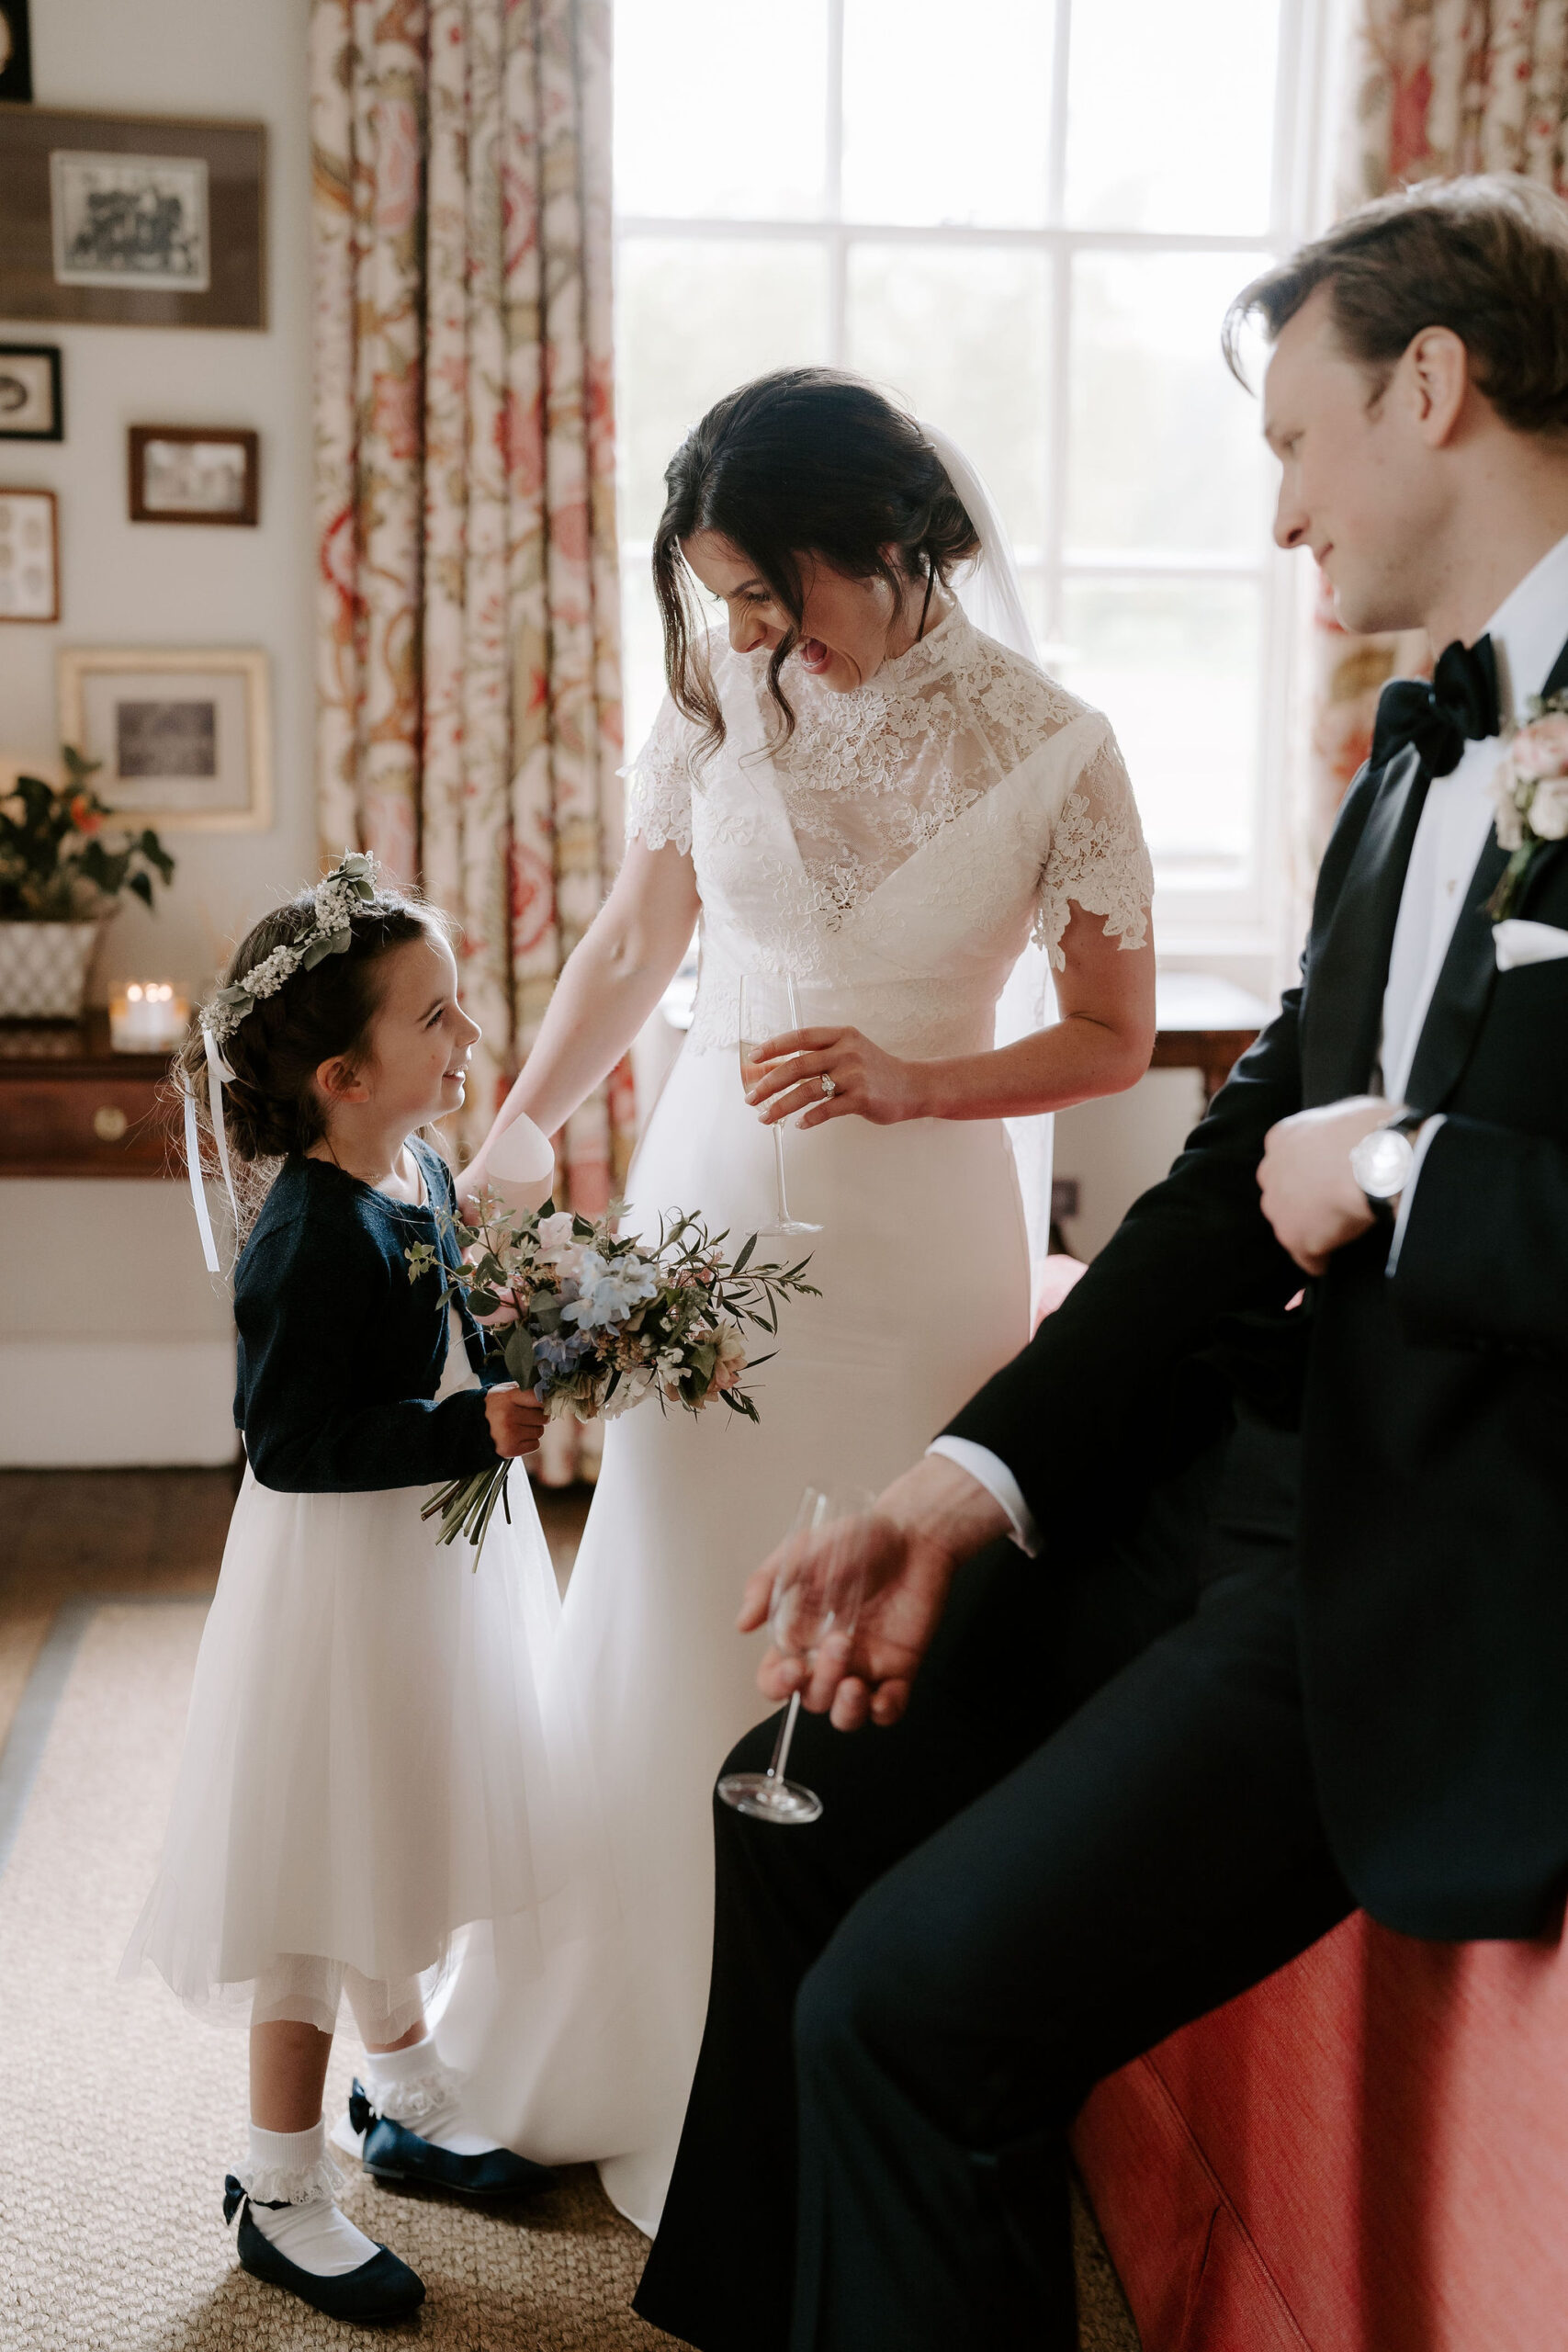 A bride and groom speak to their flower girl who wears a tulle dress and a flower crown in her hair